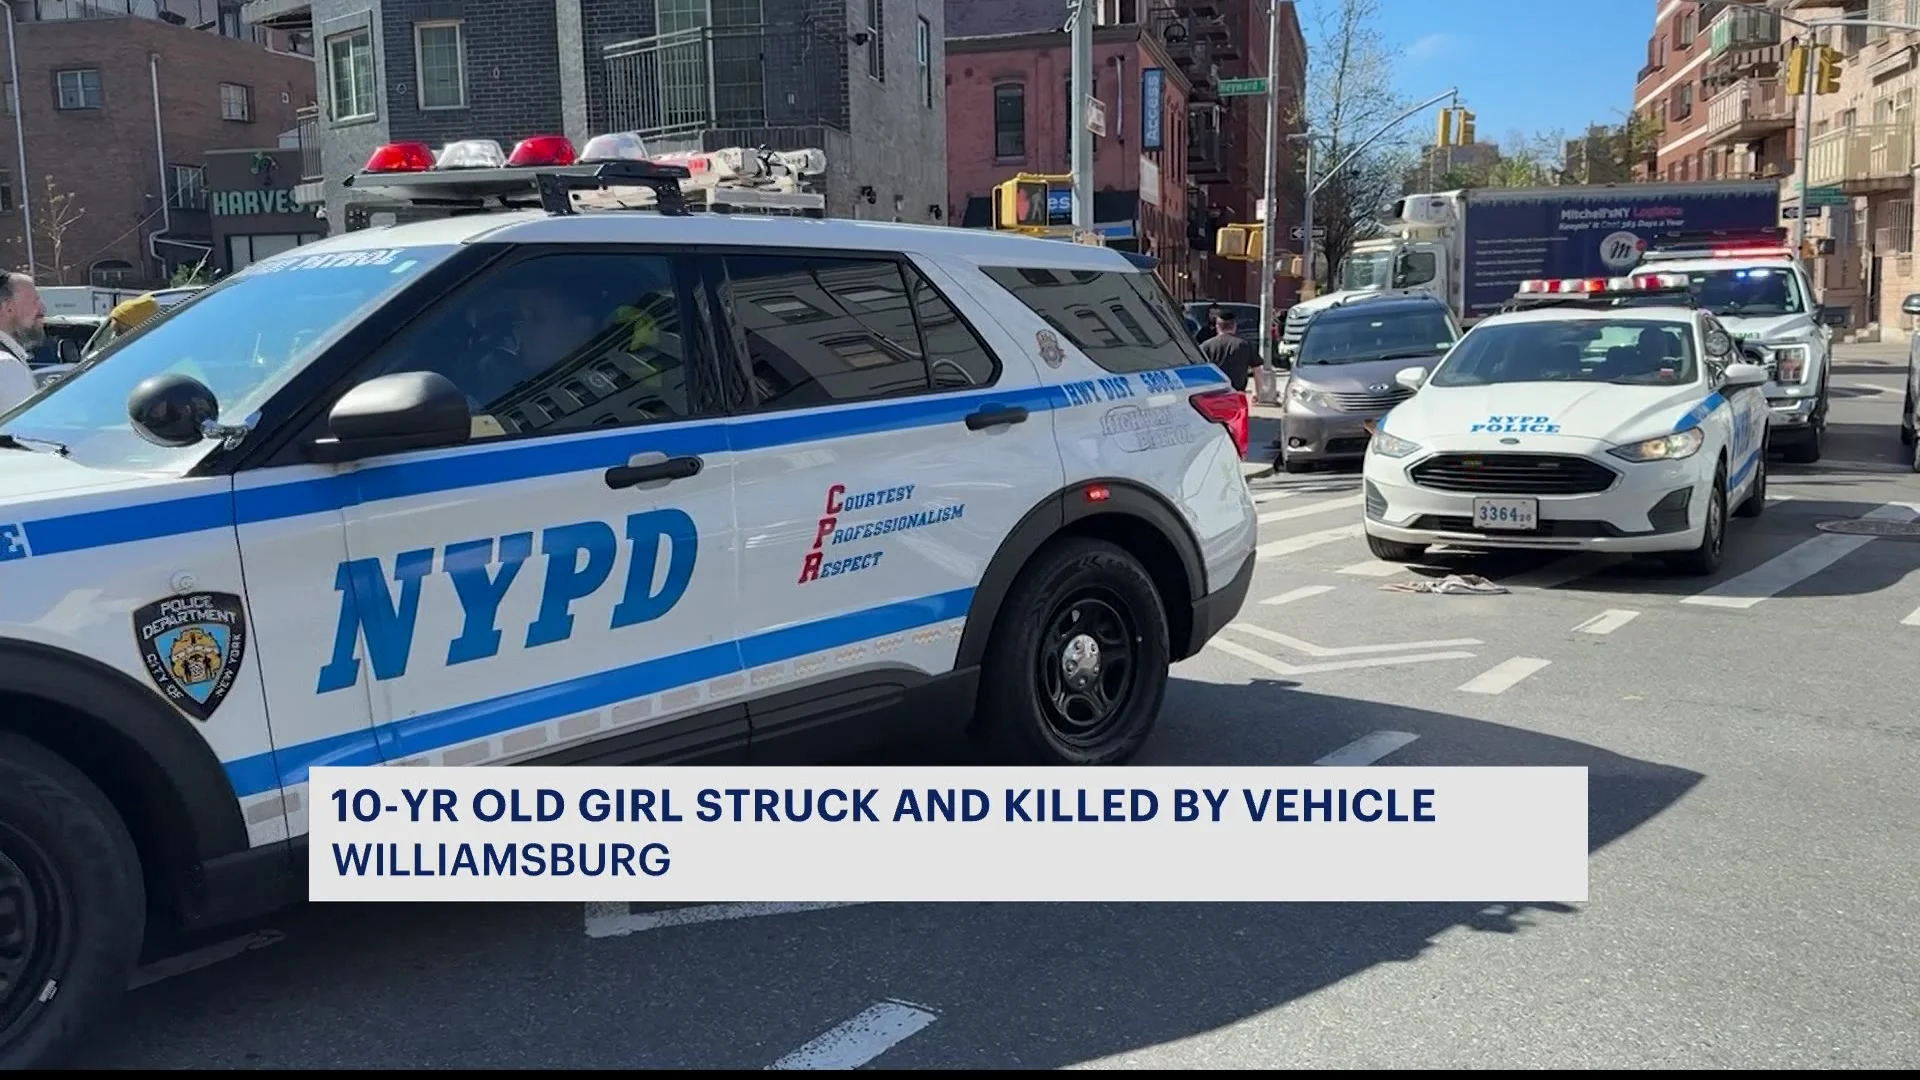 Police: 10-year-old girl fatally struck by vehicle in Williamsburg